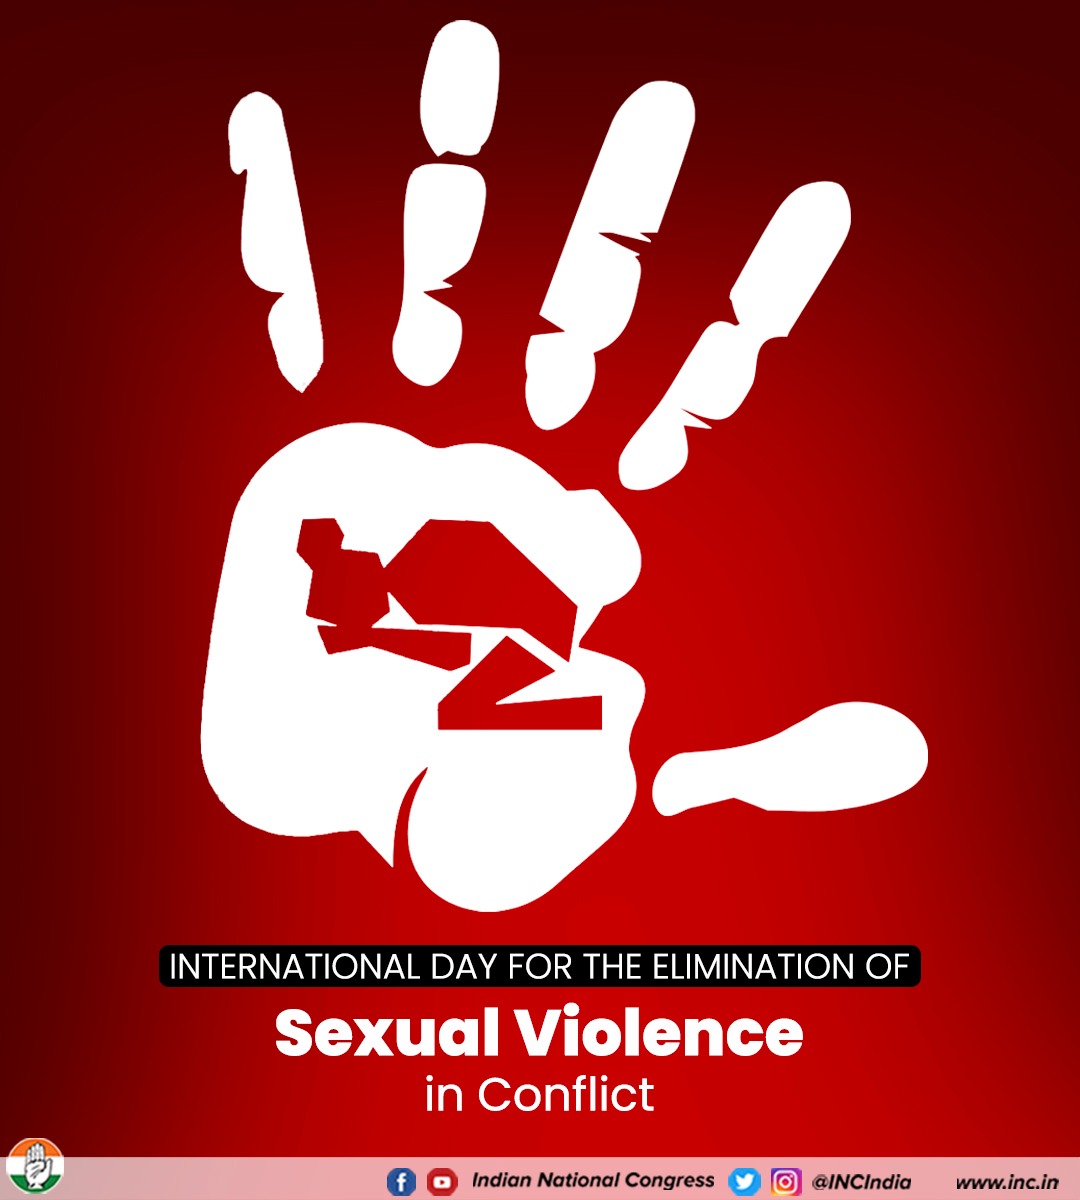 On International Day for the Elimination of Sexual Violence in Conflict, let us come together to break the silence, empower survivors, and create a world where no one suffers the horrors of sexual violence.
Let's stand united for justice and peace.